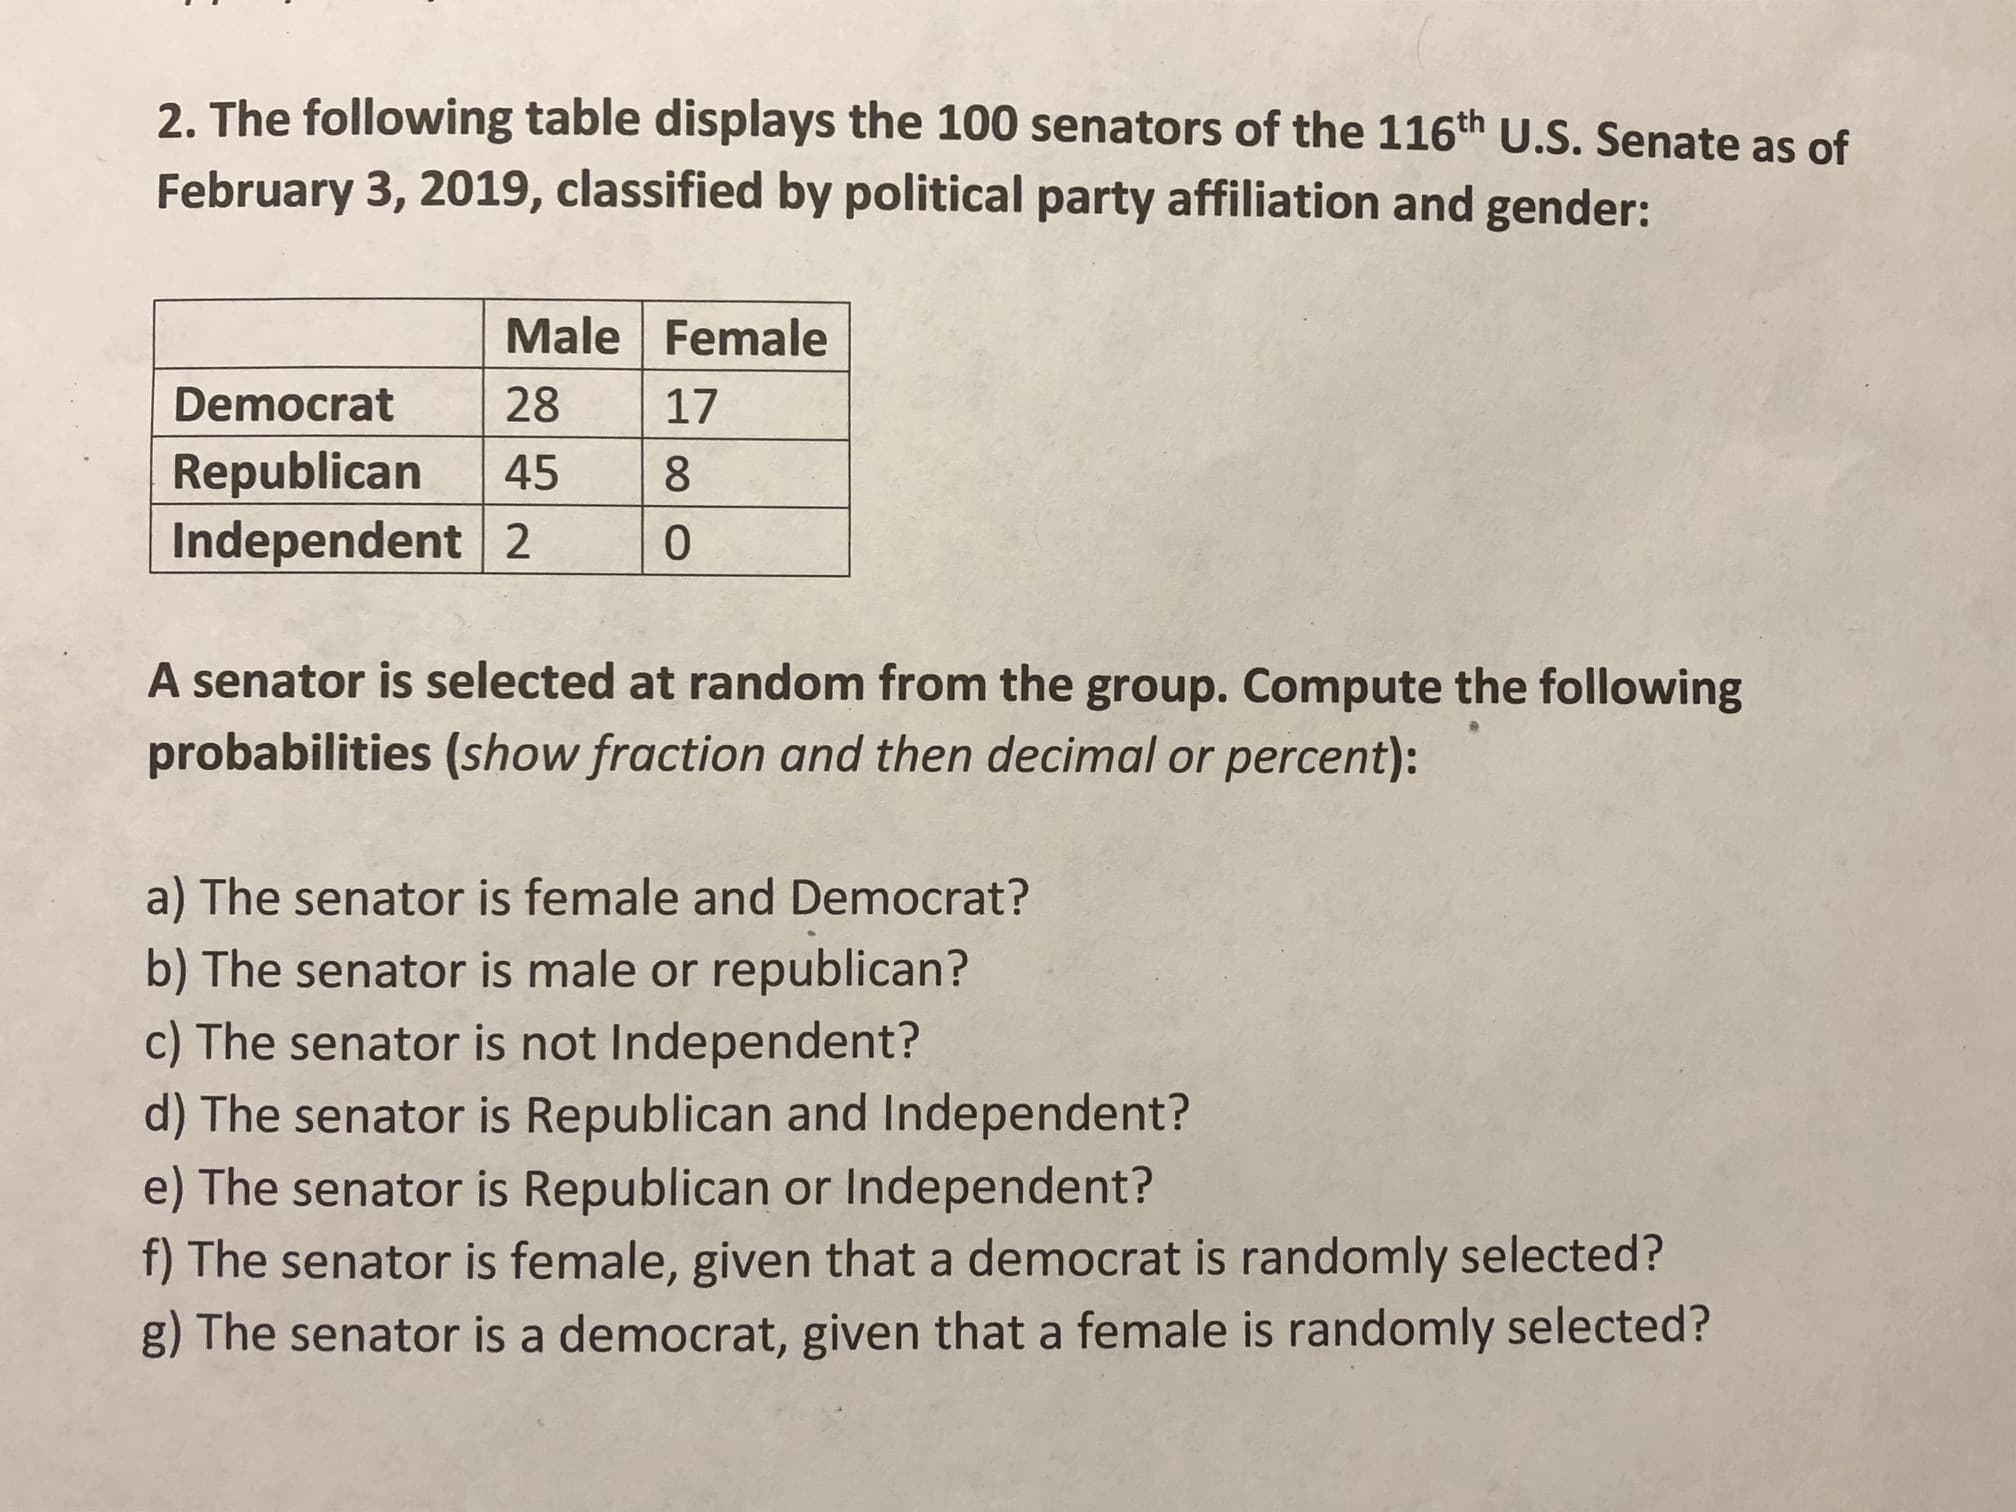 2. The following table displays the 100 senators of the 116th U.S. Senate as of
February 3, 2019, classified by political party affiliation and gender:
Male Female
Democrat 28 17
Republican 458
0
Independent 2
A senator is selected at random from the group. Compute the following
probabilities (show fraction and then decimal or percent):
a) The senator is female and Democrat?
b) The senator is male or republican?
c) The senator is not Independent?
d) The senator is Republican and Independent?
e) The senator is Republican or Independent?
f) The senator is female, given that a democrat is randomly selected?
g) The senator is a democrat, given that a female is randomly selected?
